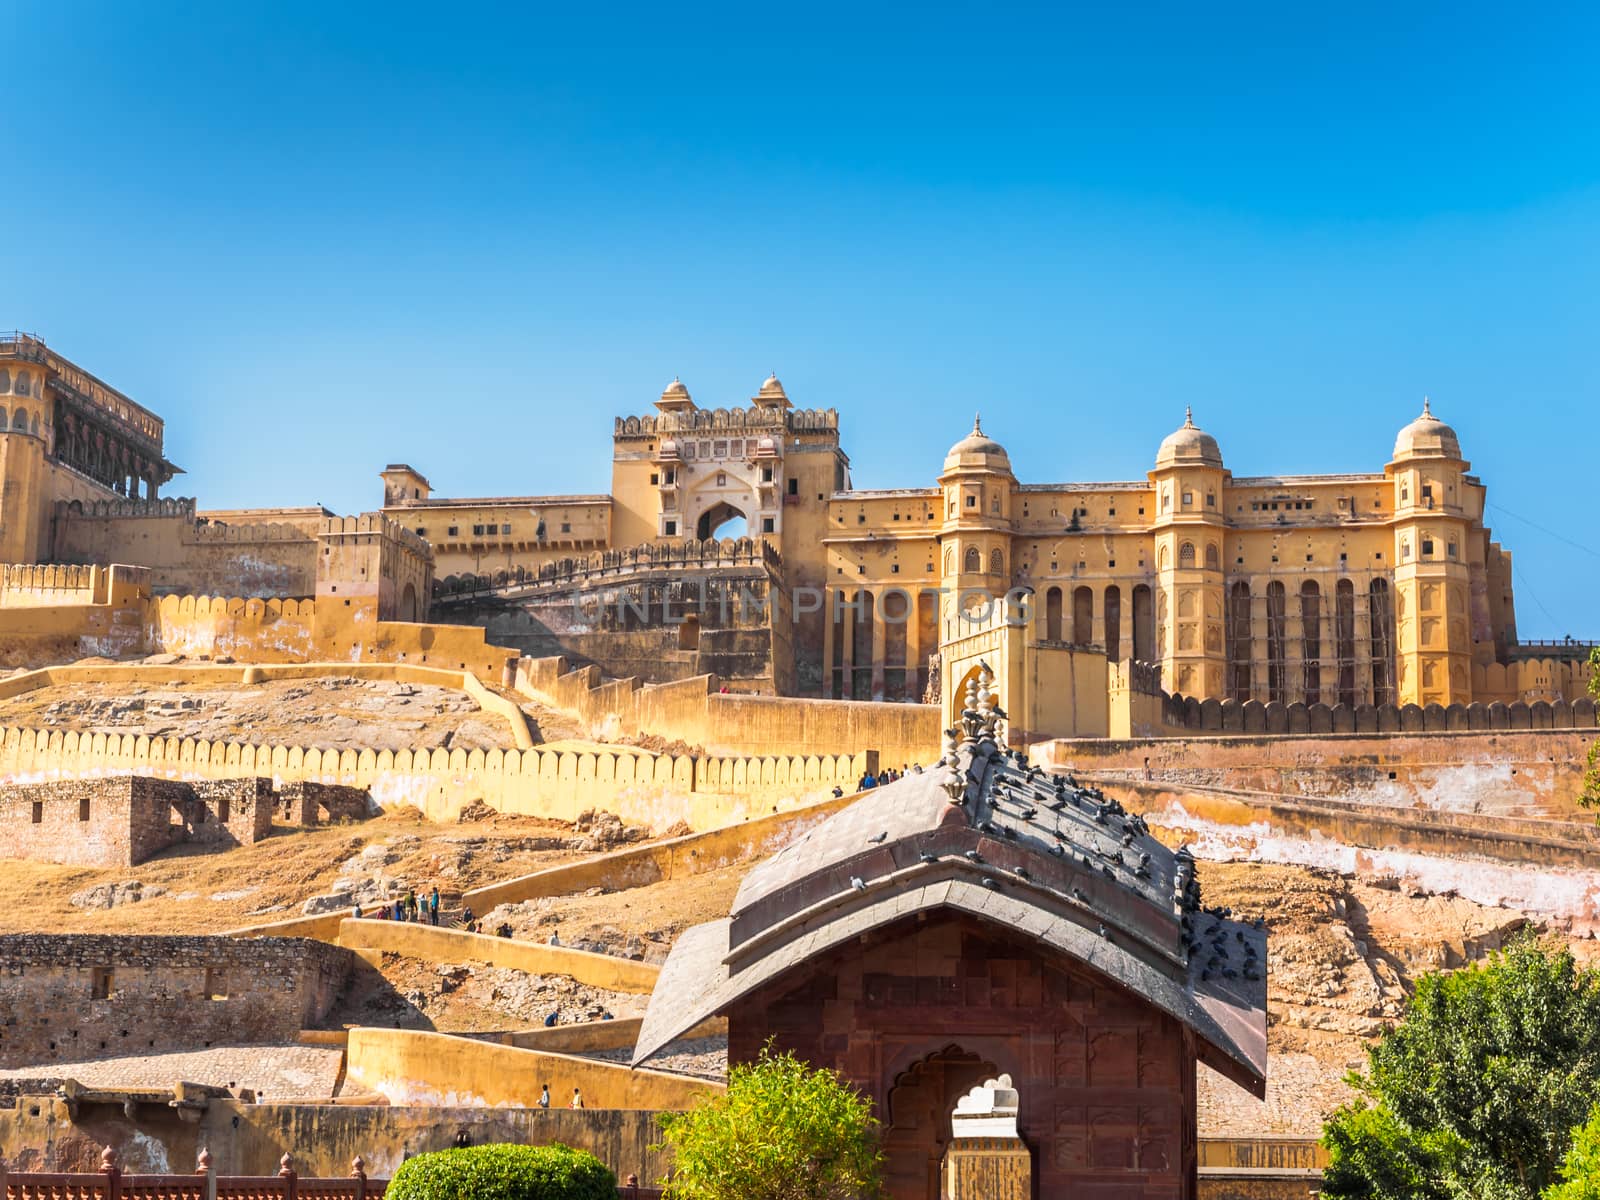 Ancient Amber Fort in Jaipur, Rajasthan, India